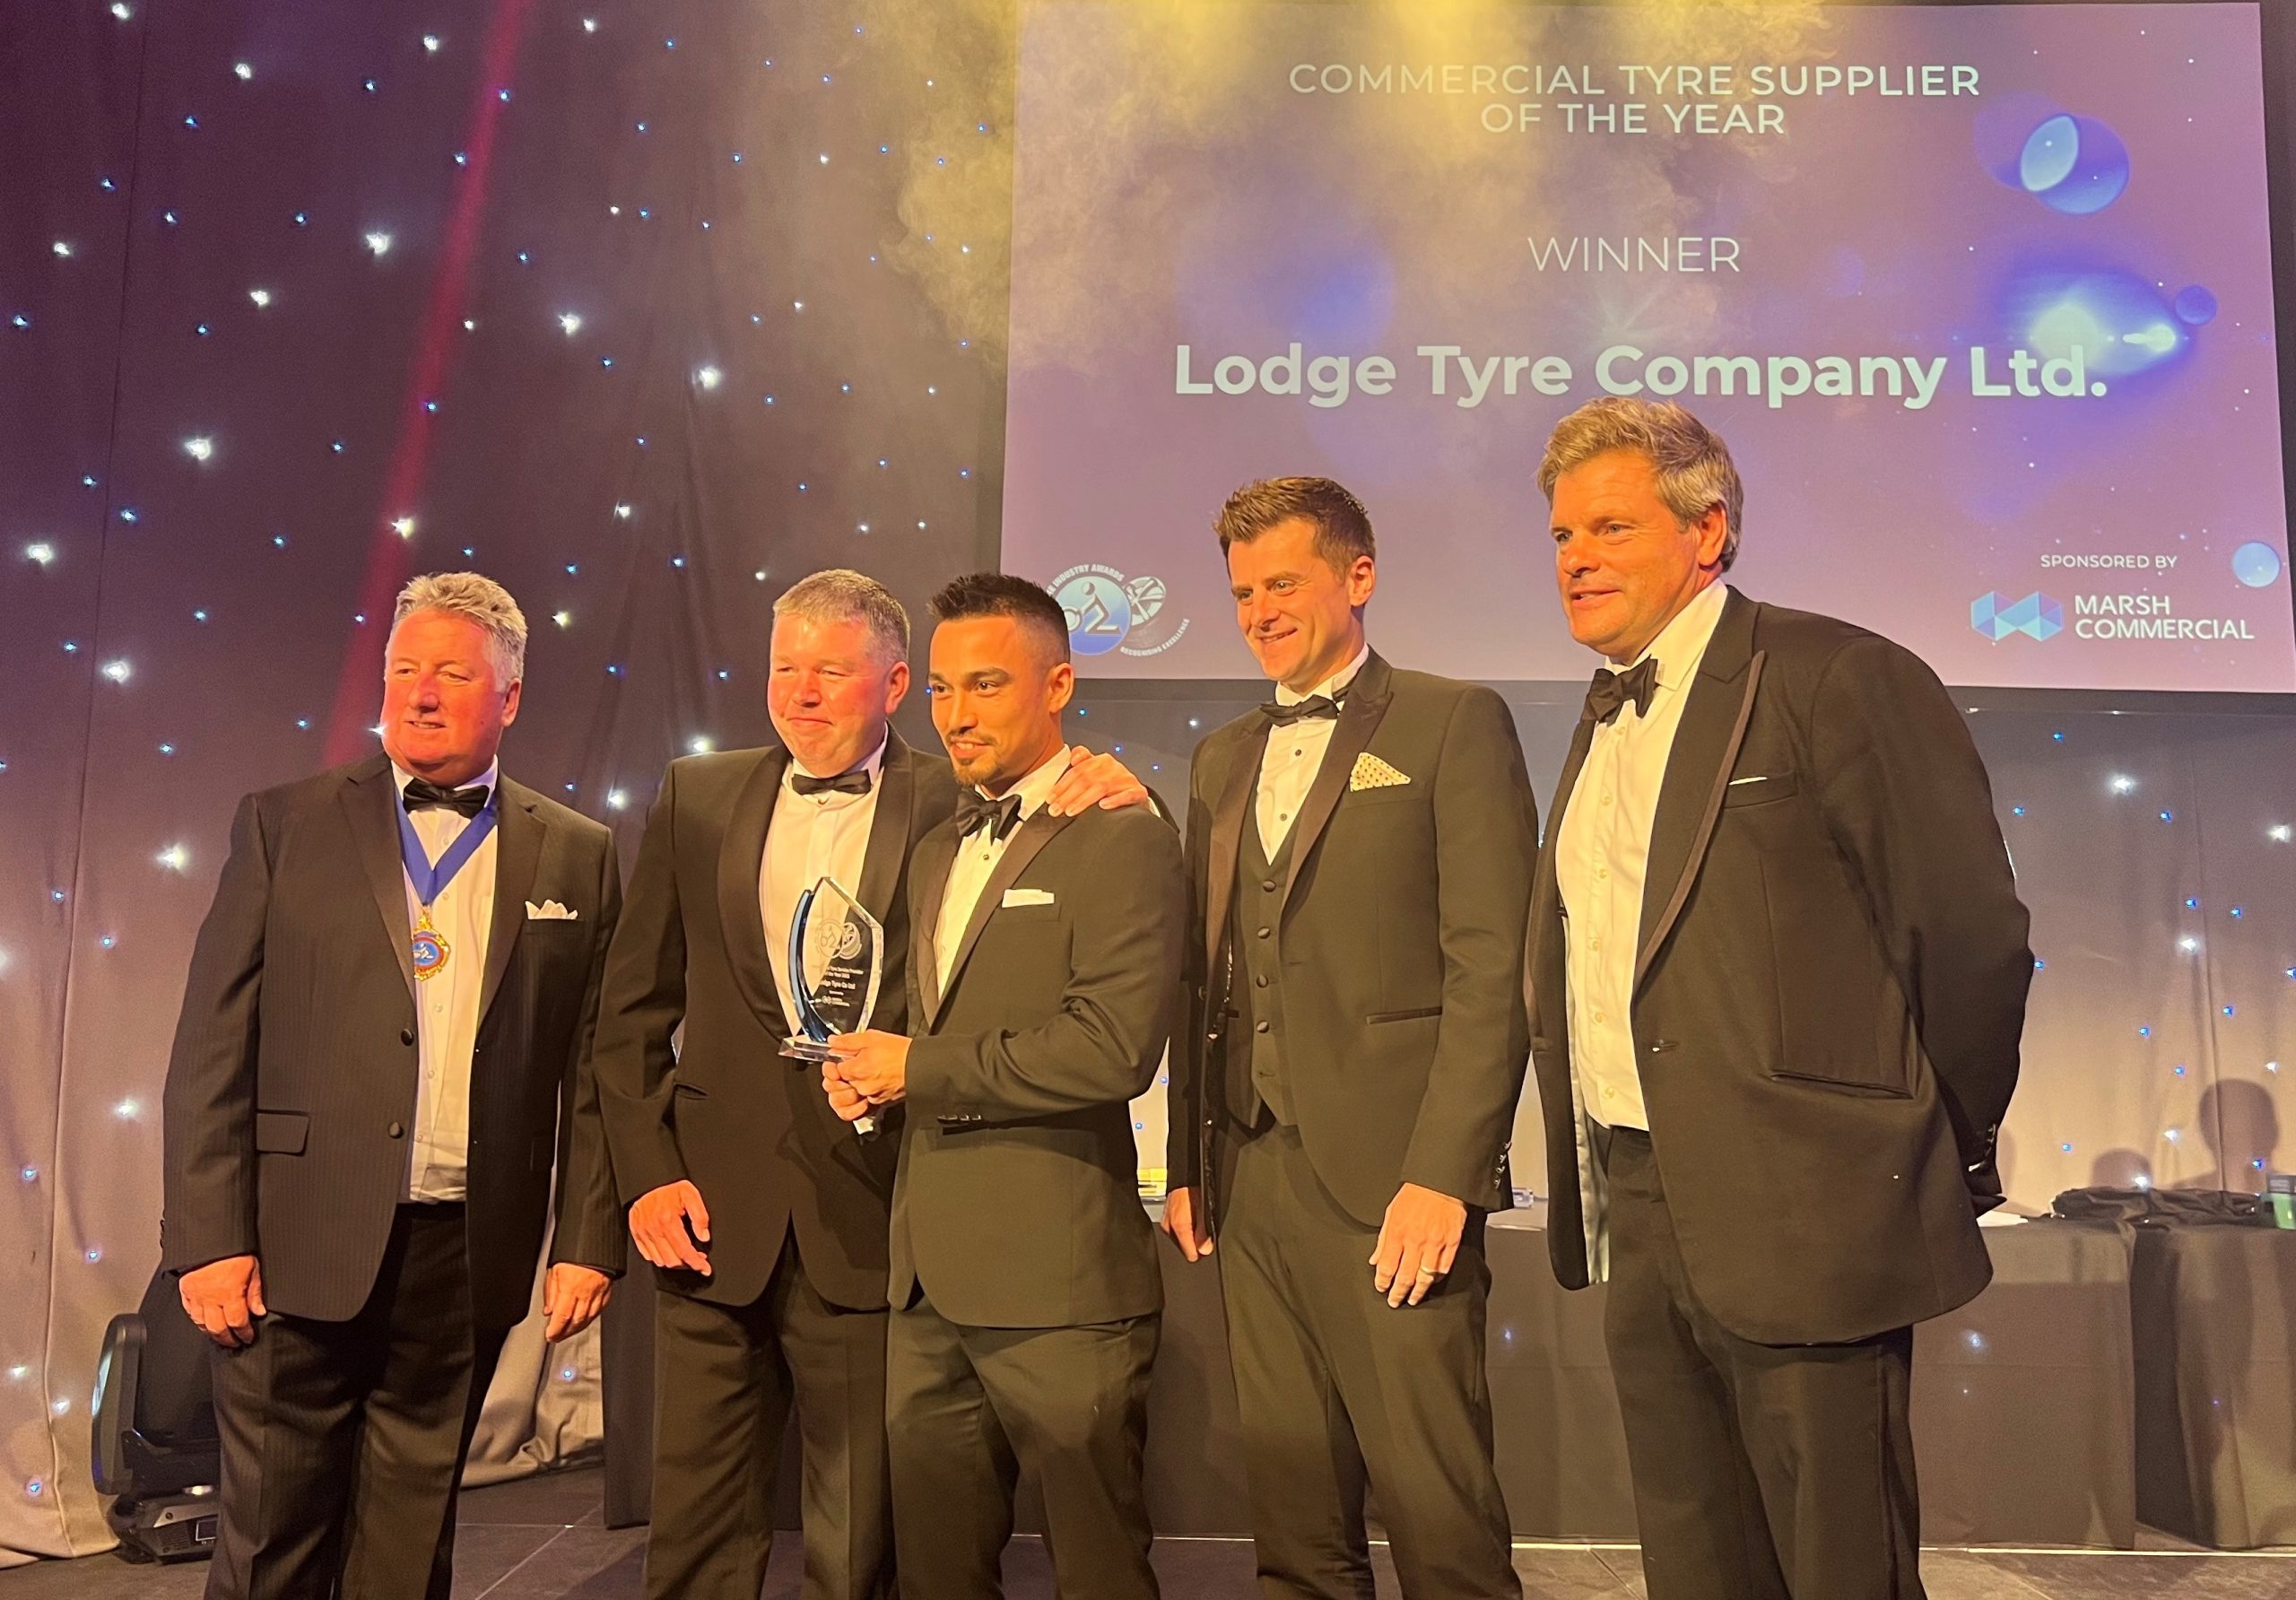 Commercial Tyre Supplier of the Year